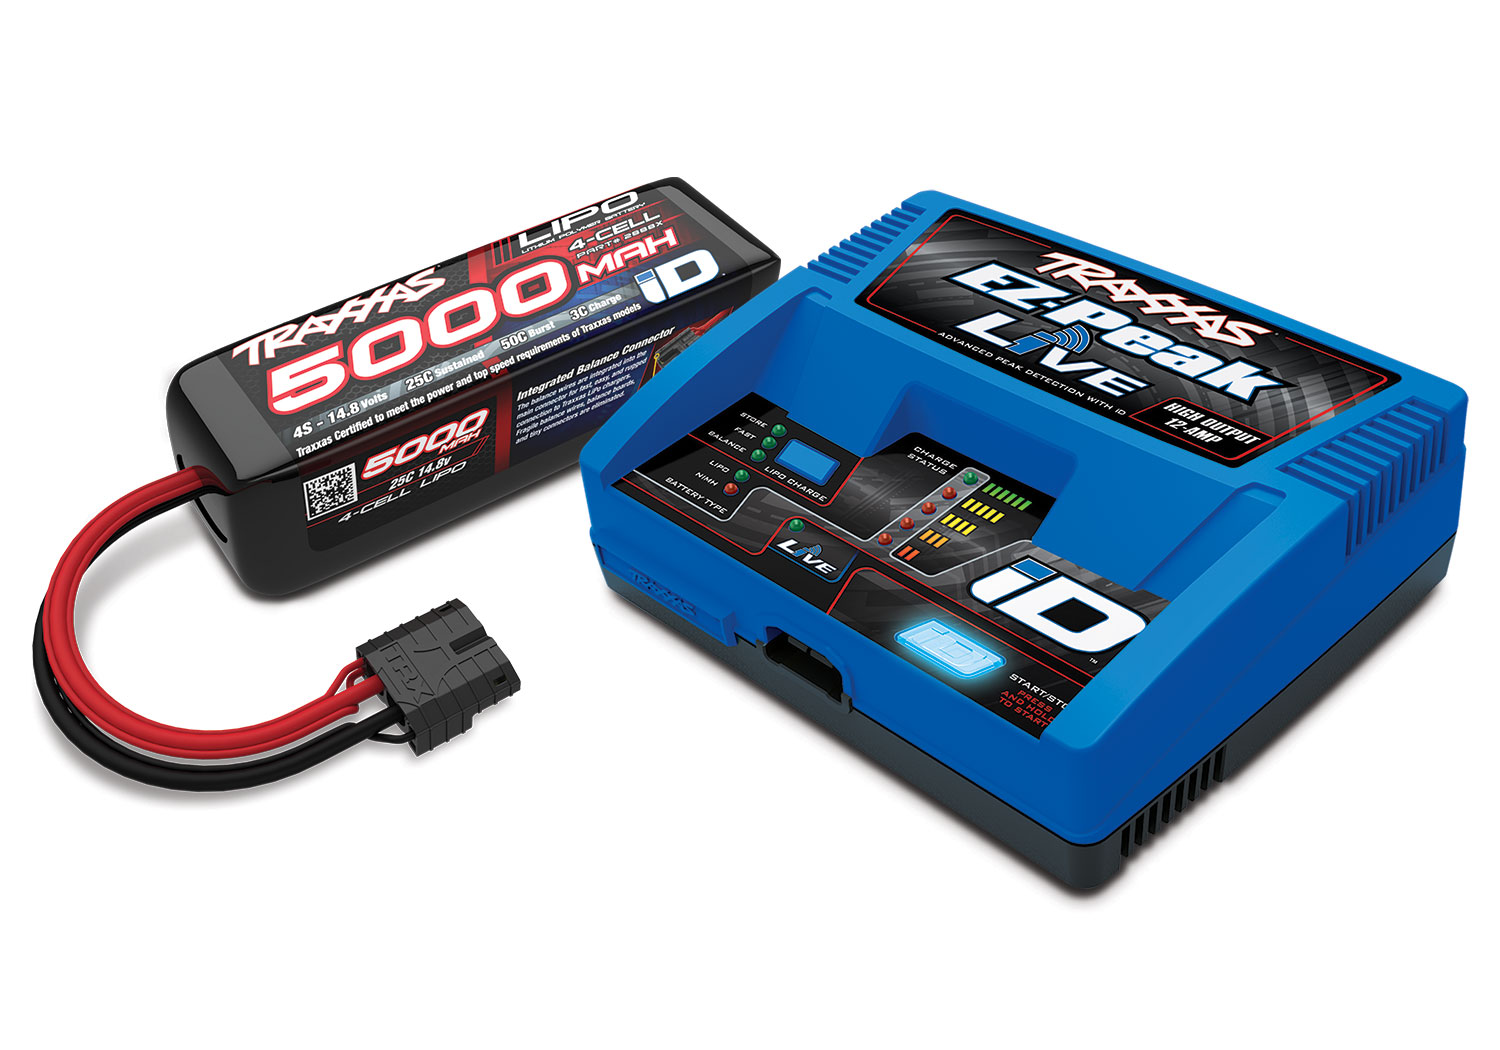 Traxxas Maxx 4S EZ-Peak Live ID Charger & 4S 5000mAh LiPo Battery Completer (2996)